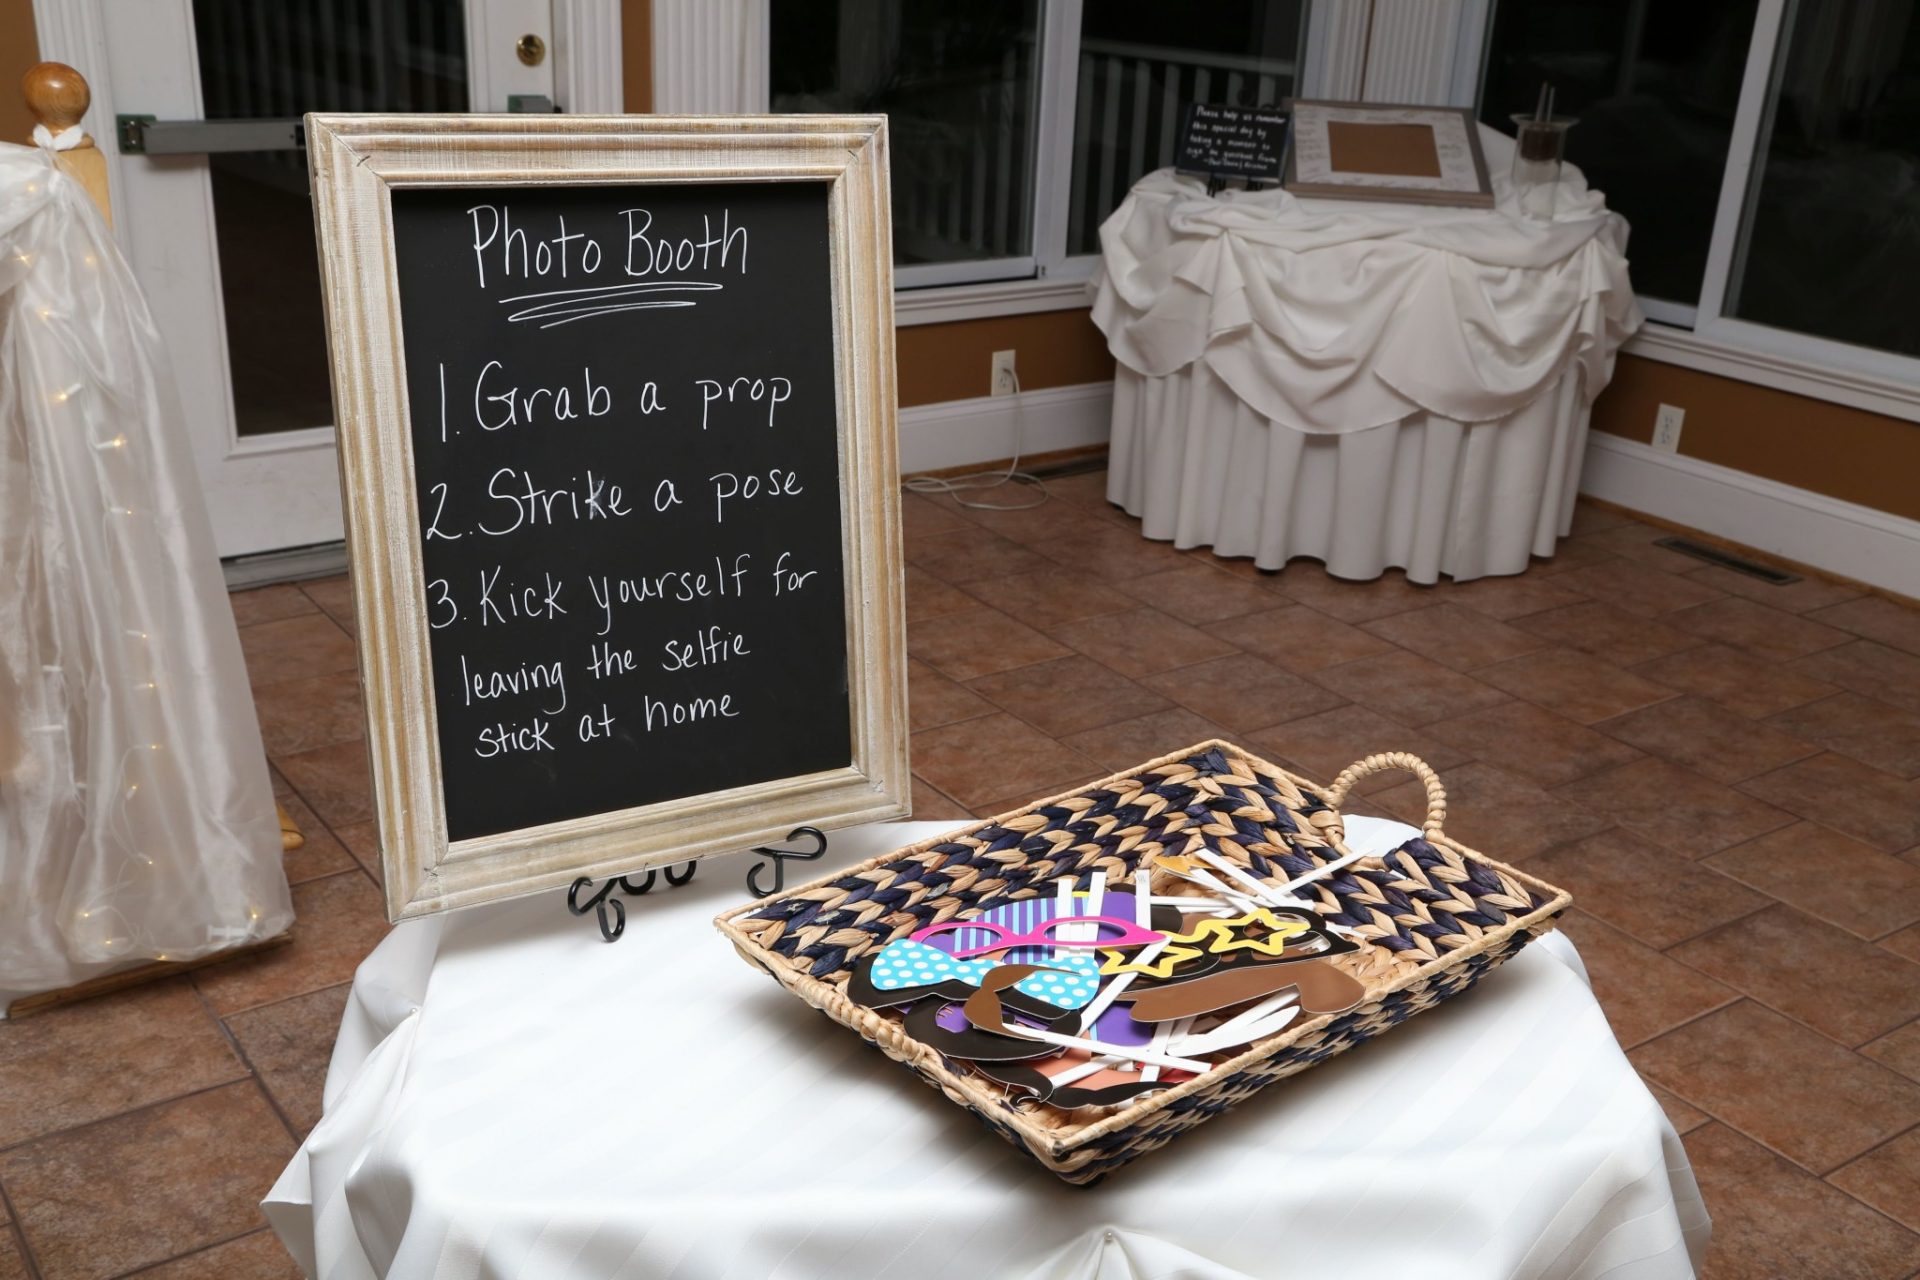 Many weddings in maryland have photo booths such as this one with fun props for guests to use.